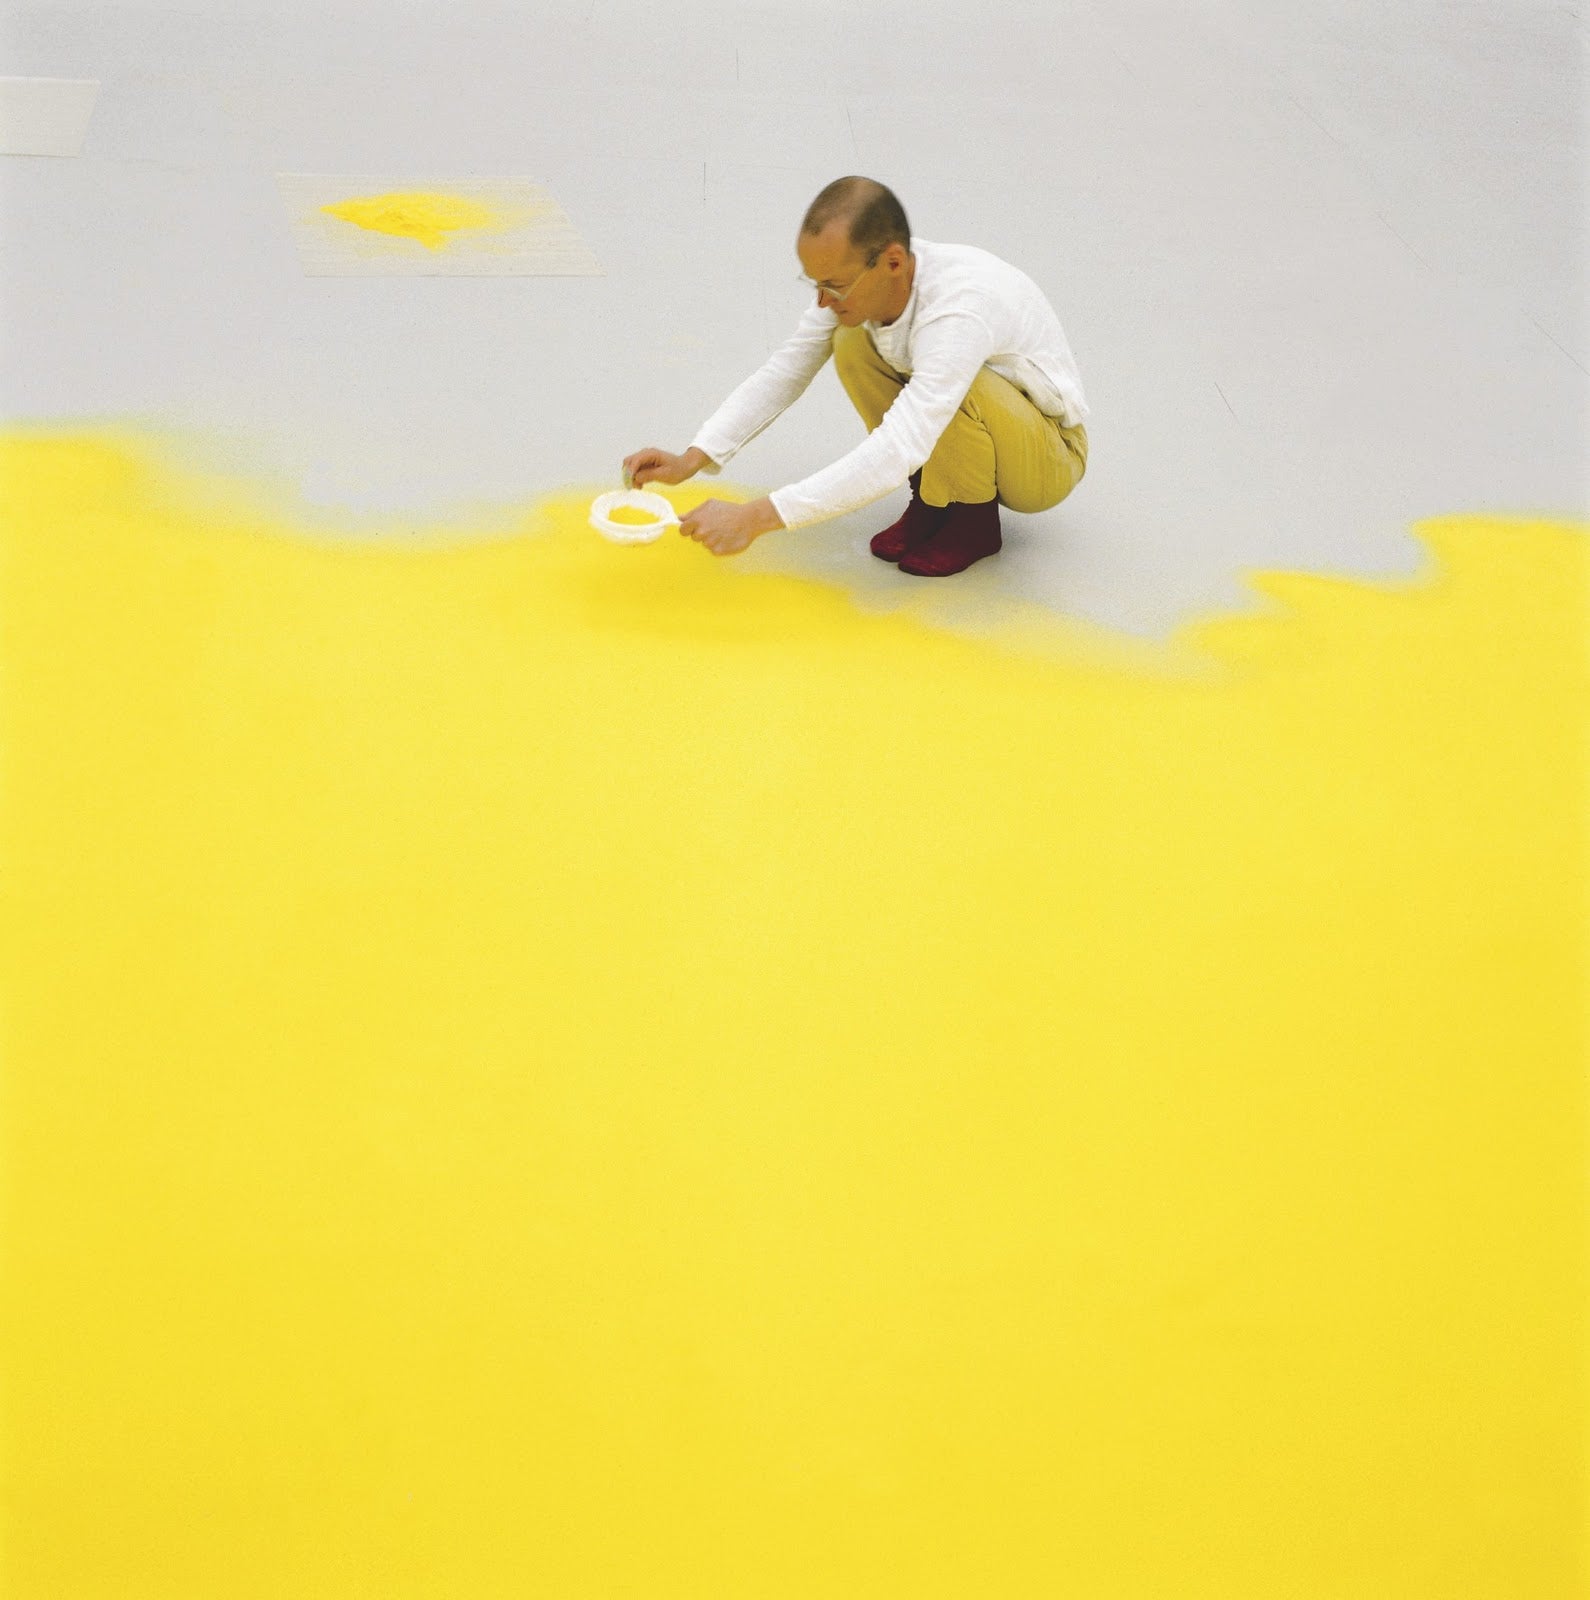 Wolfgang Laib is planning to carpet MoMA with millions of tiny pollen grains